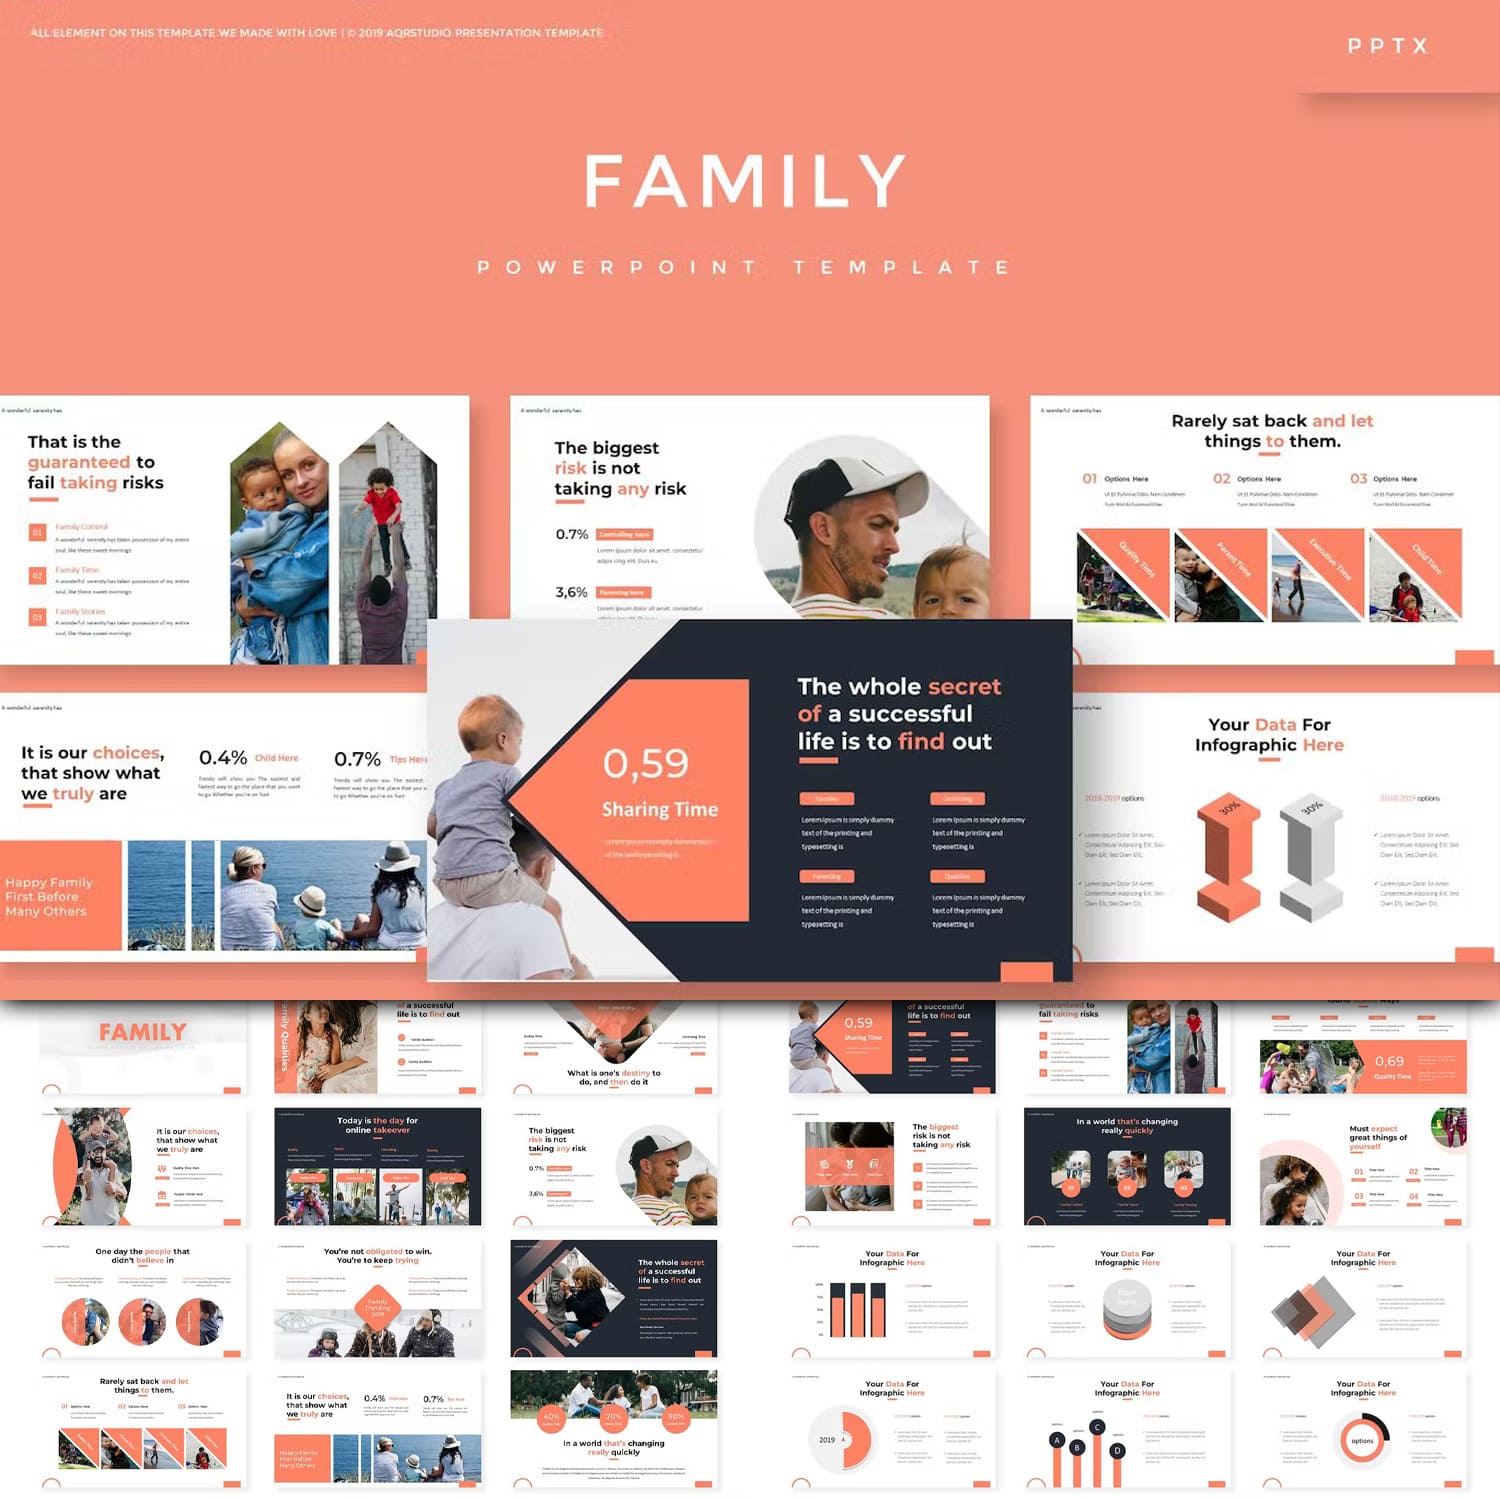 Family powerpoint template - main image preview,